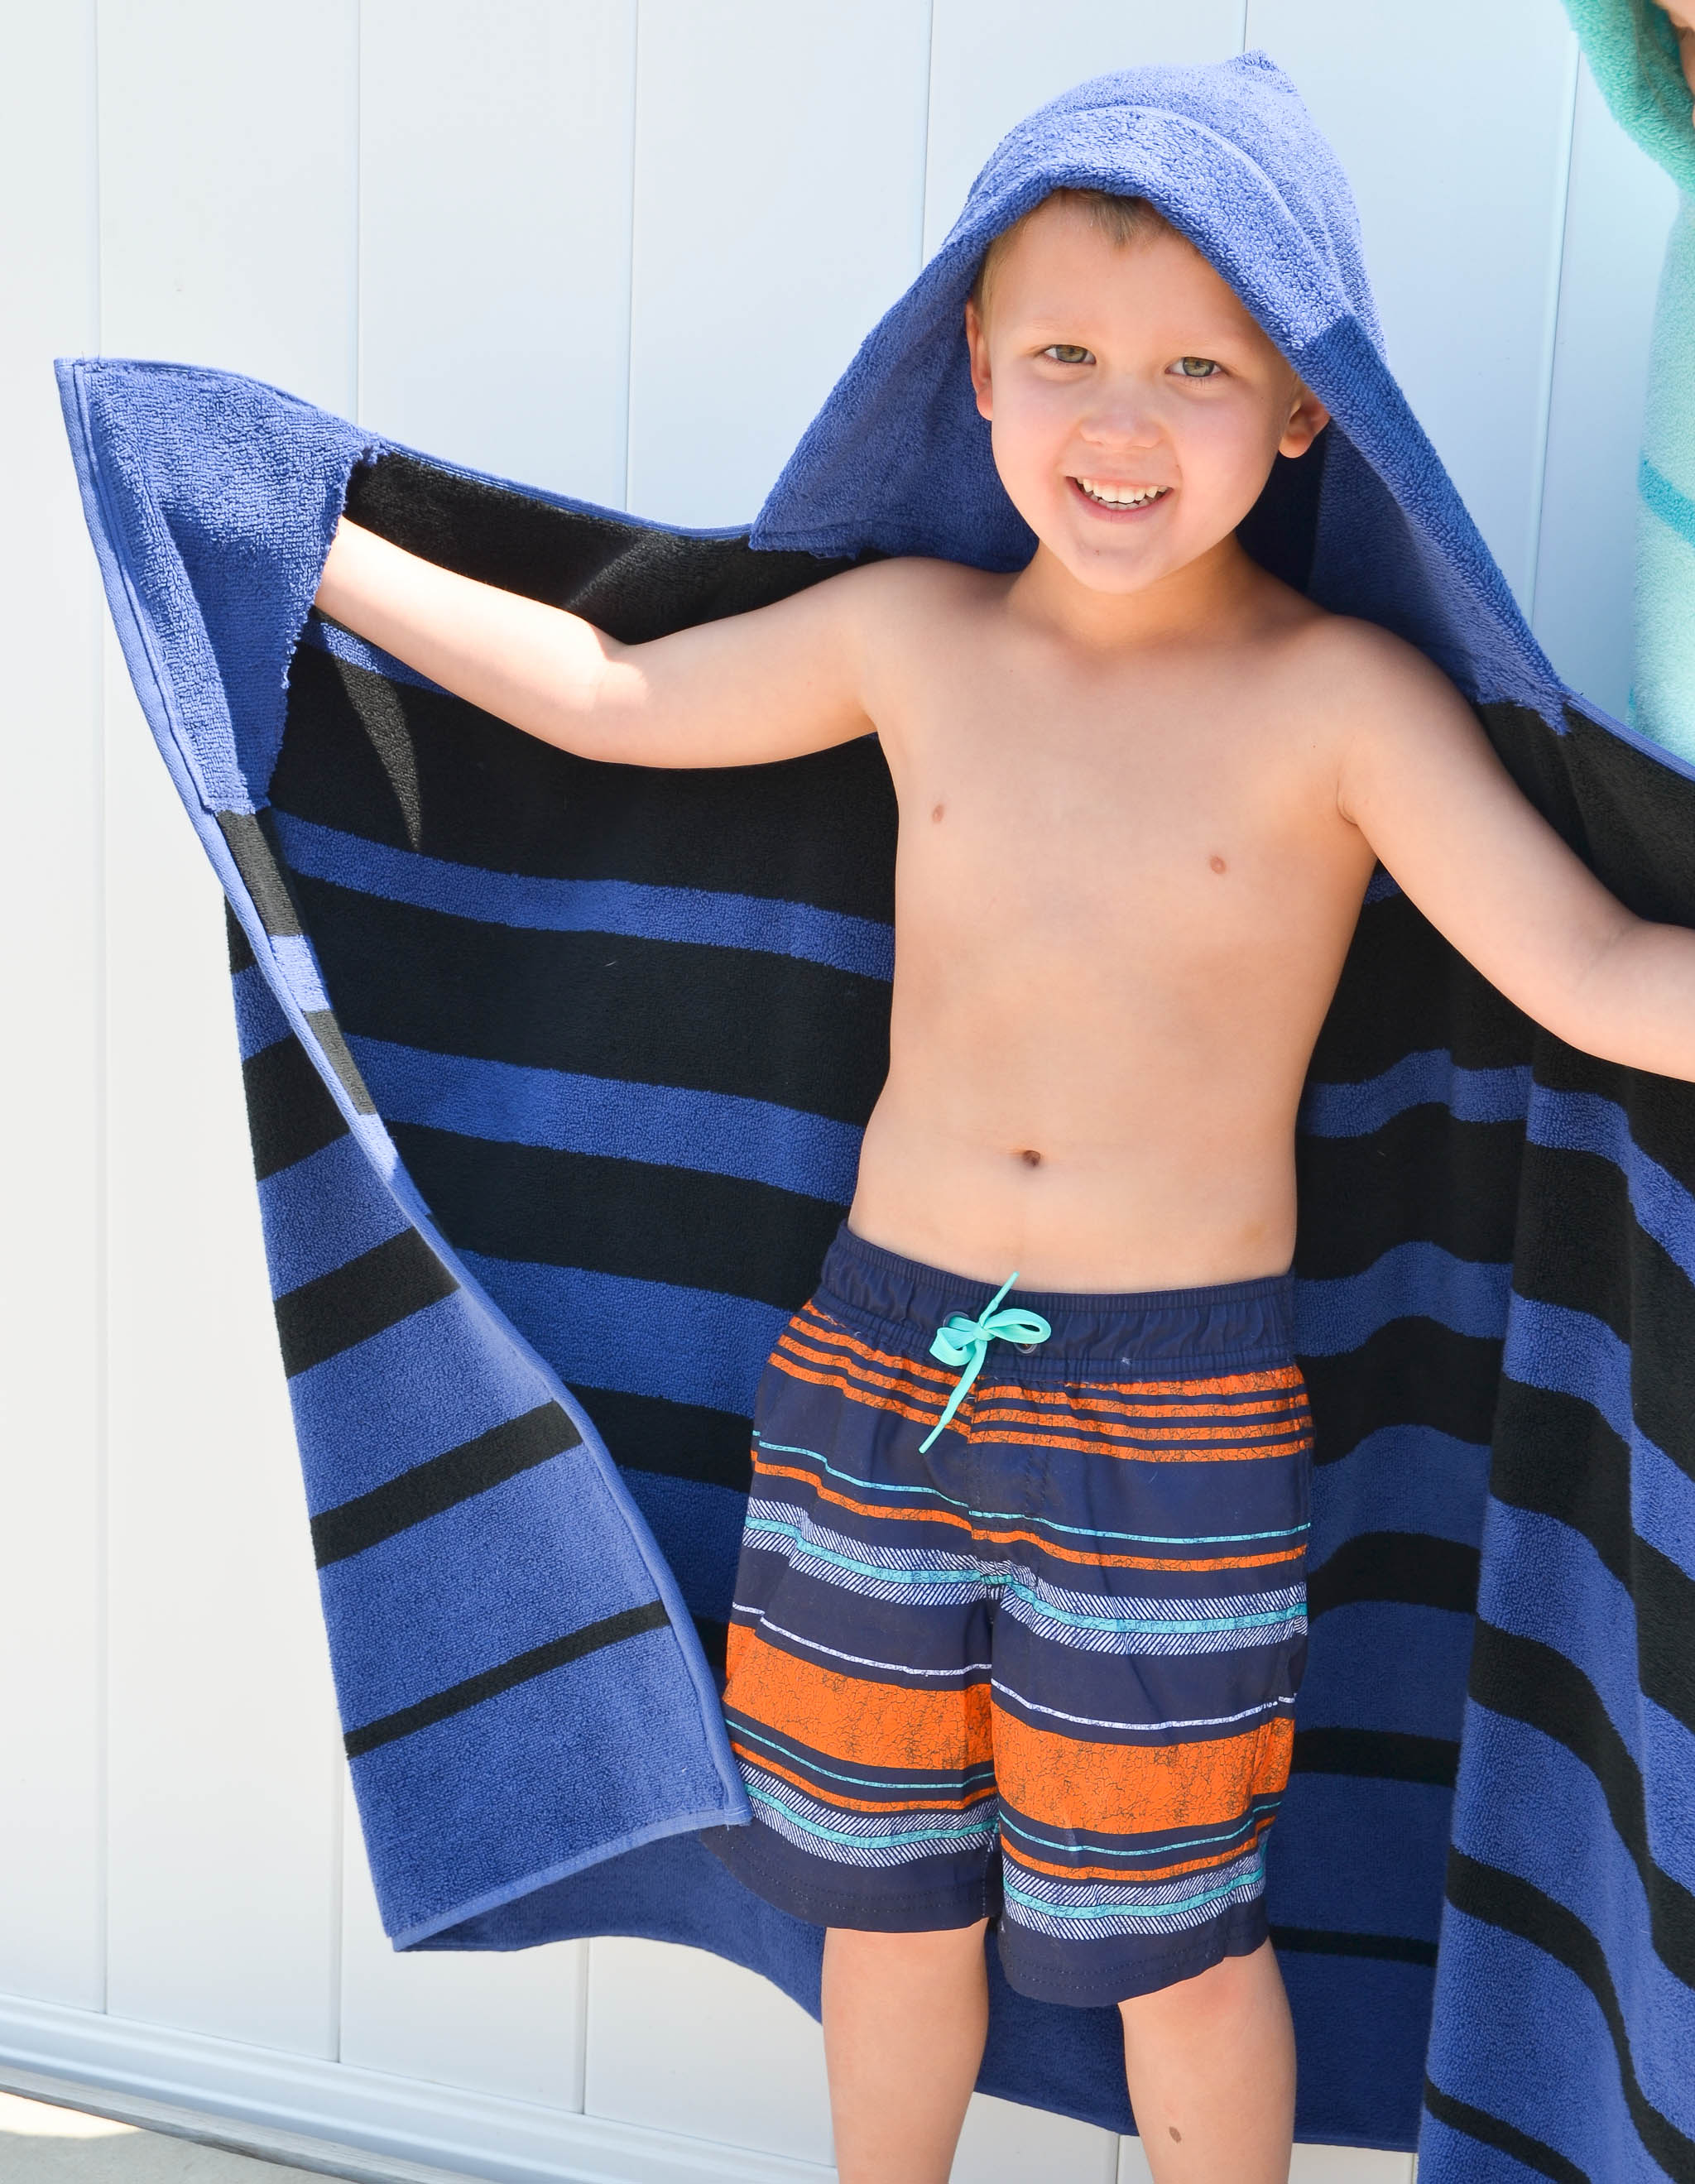 DIY Hooded Towel Tutorial for Toddlers and Big Kids - Project Nursery